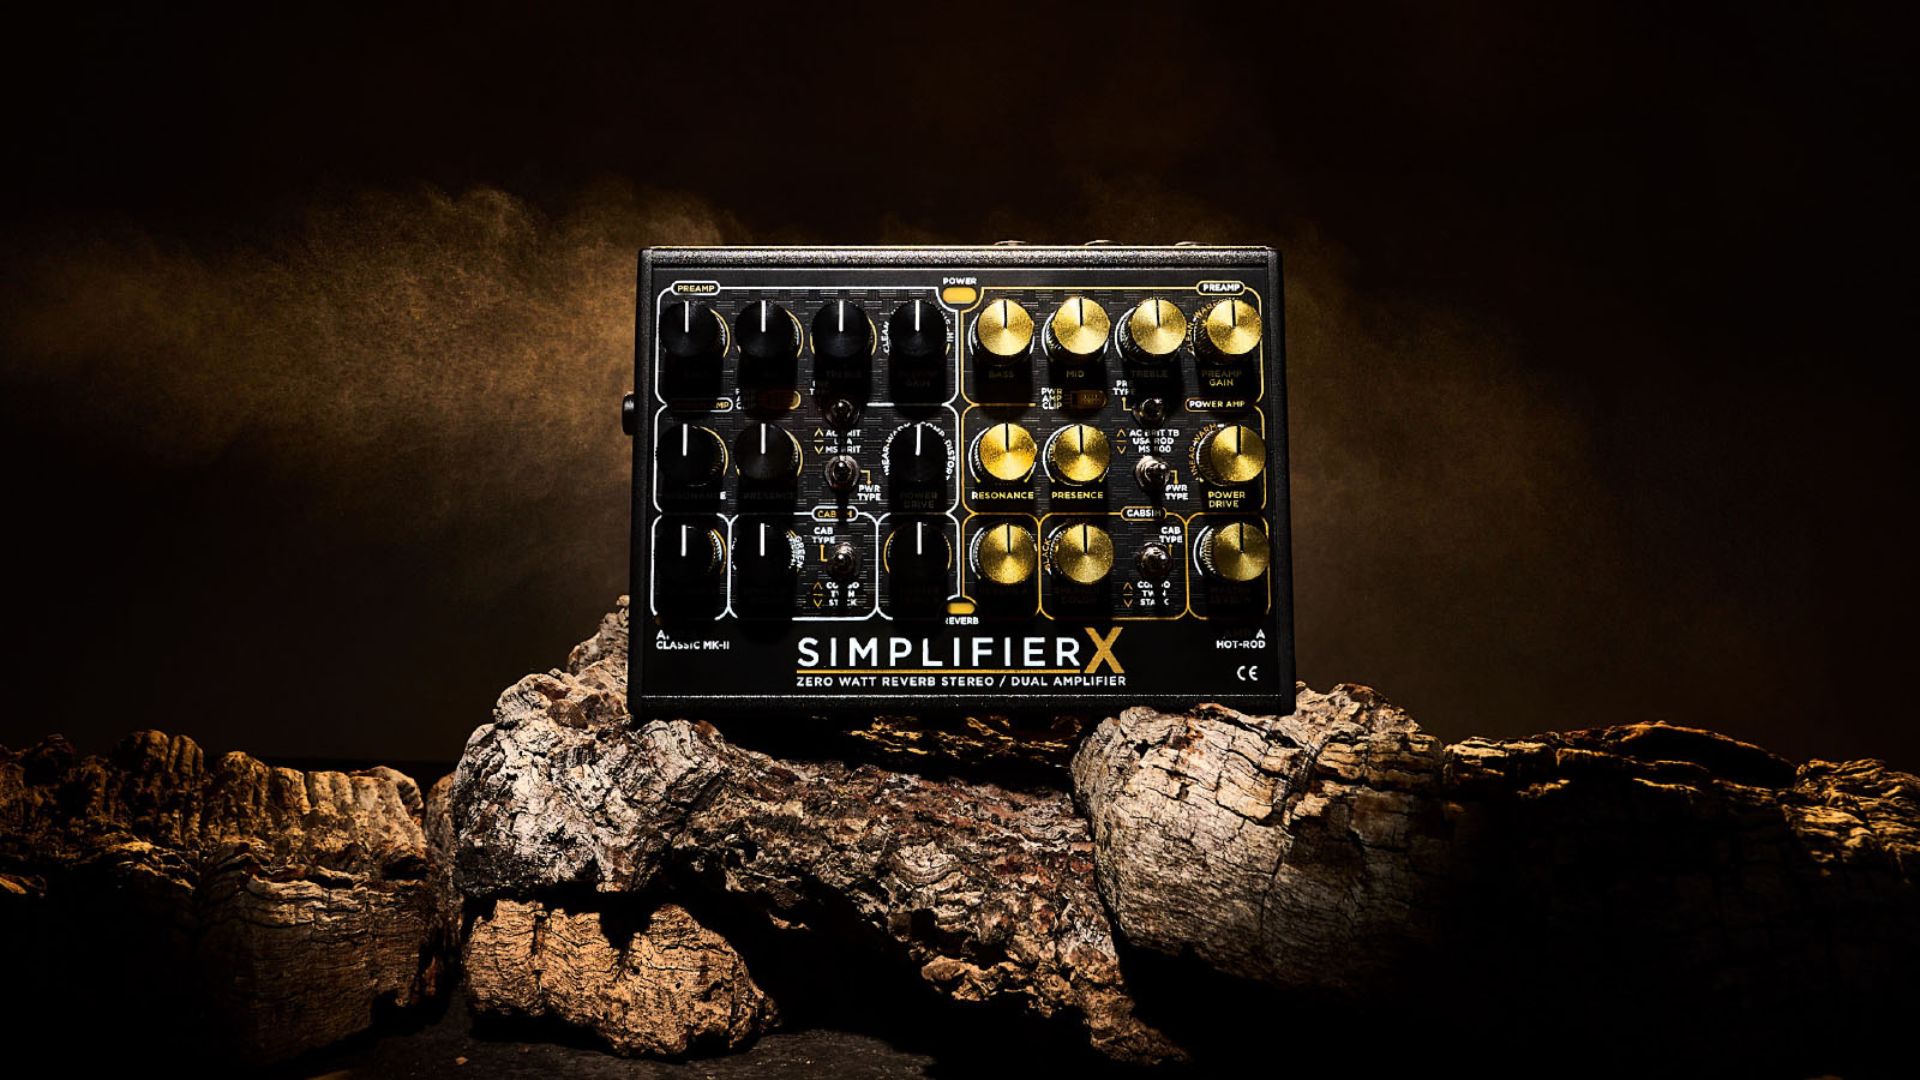 “Designed for guitarists seeking the best tones ever produced by analog gear”: DSM Humboldt unveils the Simplifier X – “the most advanced analog amp simulator ever made”